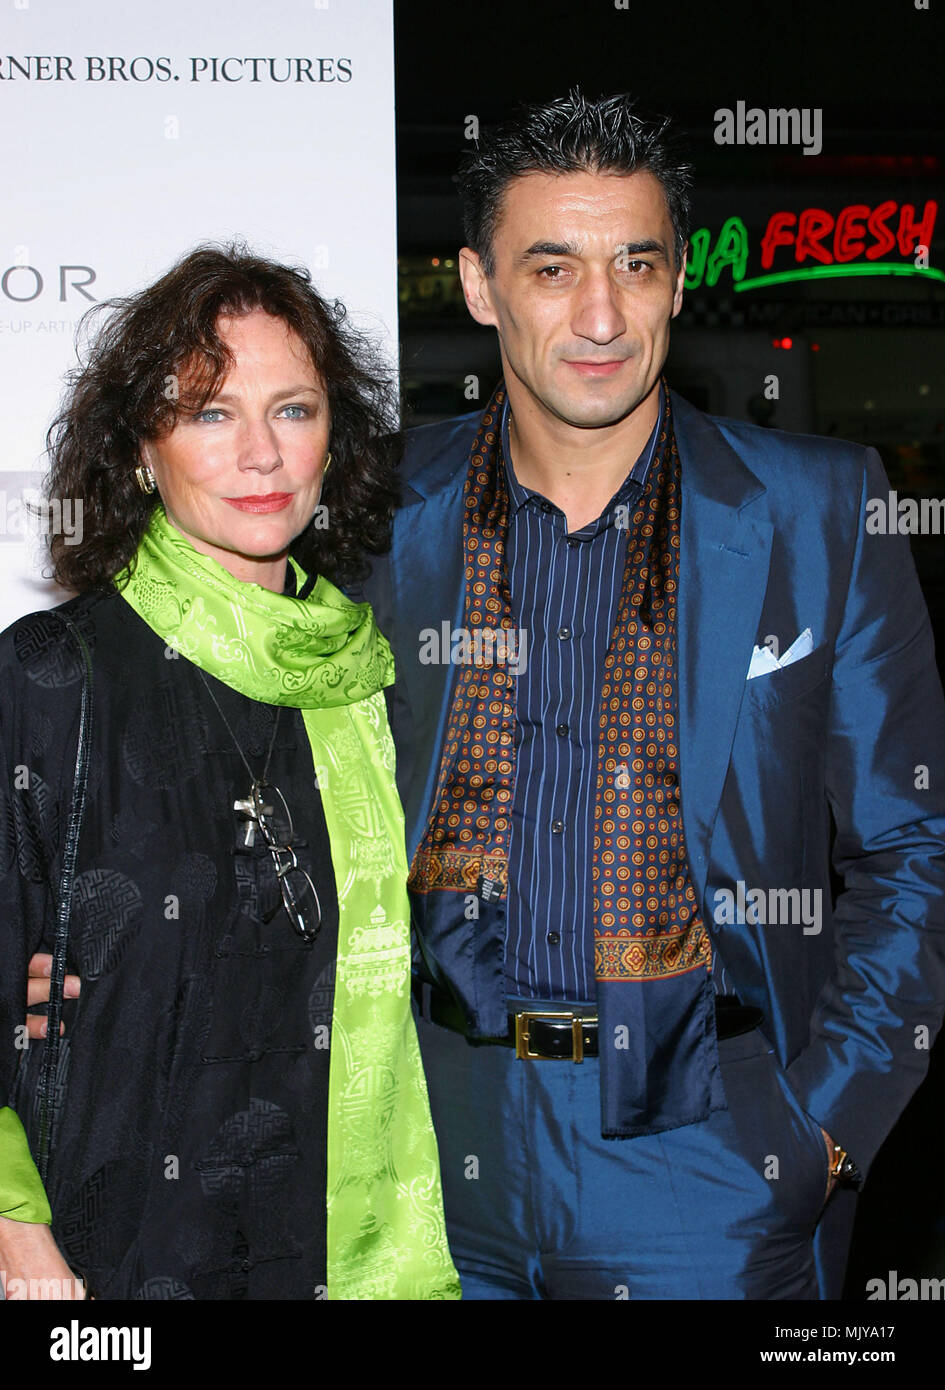 Jacqueline Bisset and Emin Boztepe rriving at the AVIATOR Premiere at the Chinese Theatre in Los Angeles. December 1st, 2004          -            BissettJacqueline BoztepeEm.JPG           -              BissettJacqueline BoztepeEm.JPGBissettJacqueline BoztepeEm  Event in Hollywood Life - California,  Red Carpet Event, Vertical, USA, Film Industry, Celebrities,  Photography, Bestof, Arts Culture and Entertainment, Topix Celebrities fashion /  from the Red Carpet-, Vertical, Best of, Hollywood Life, Event in Hollywood Life - California,  Red Carpet , USA, Film Industry, Celebrities,  movie cele Stock Photo